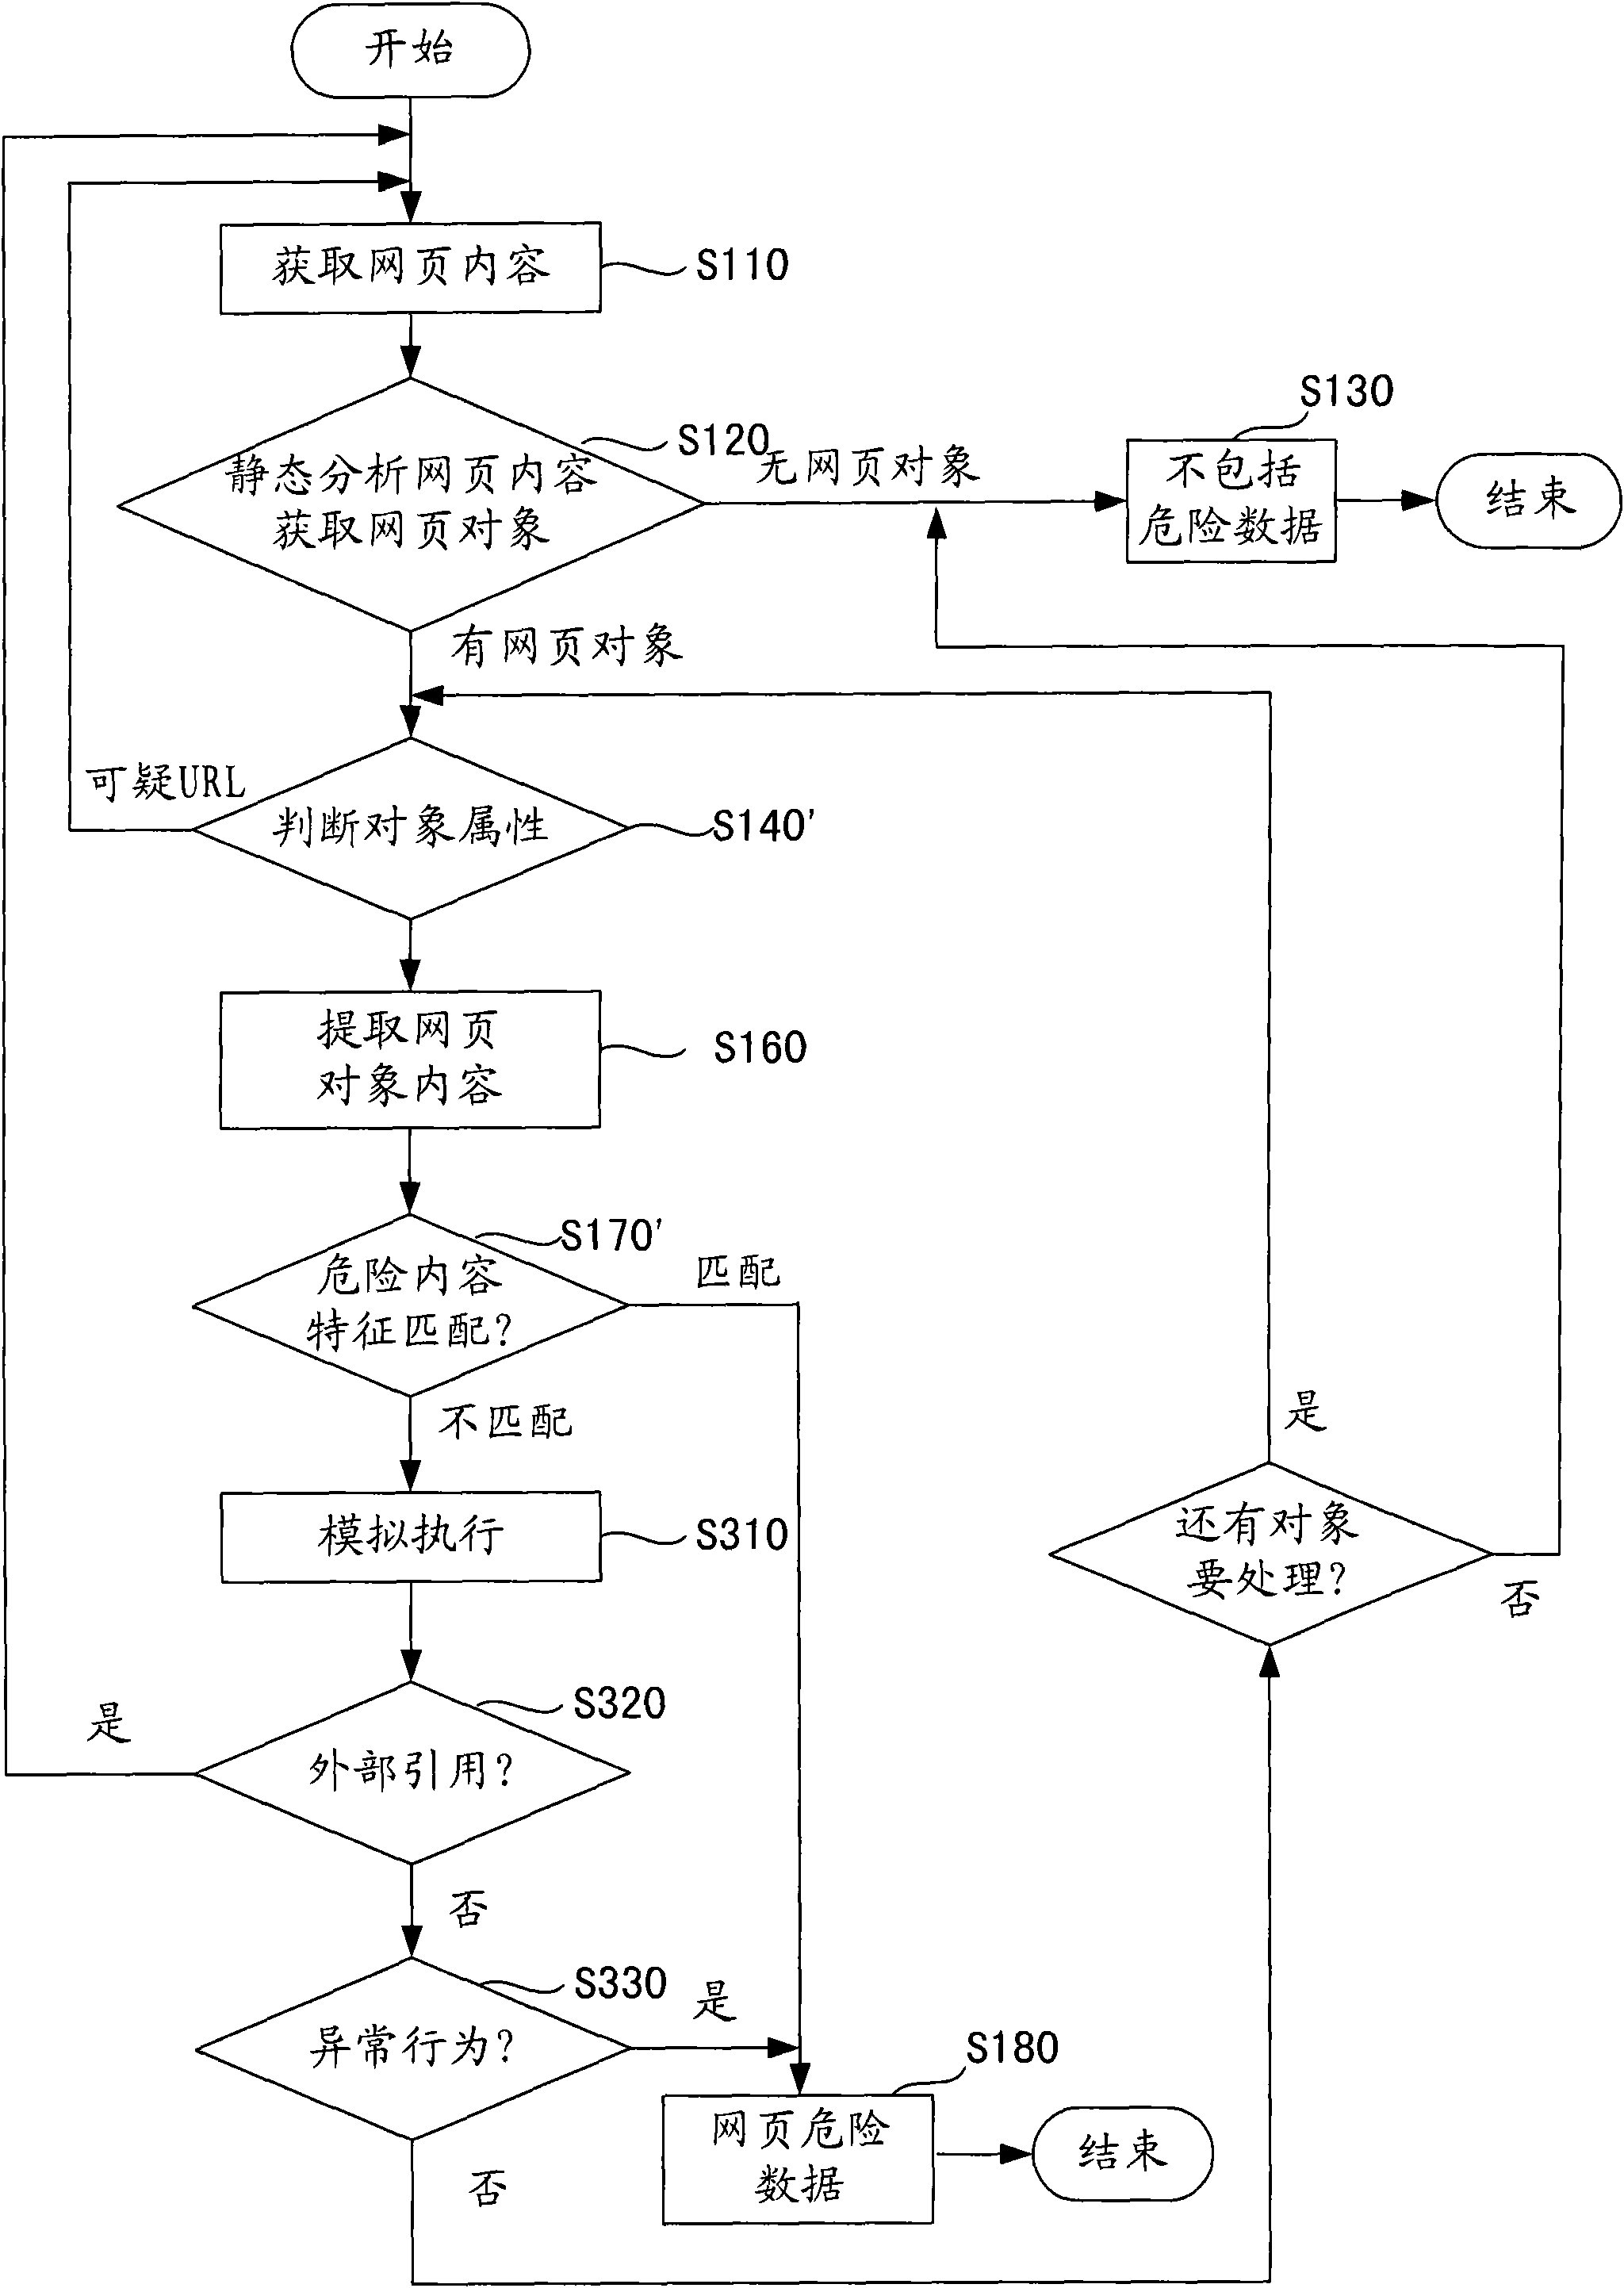 Method and system for detecting web page horse hanging